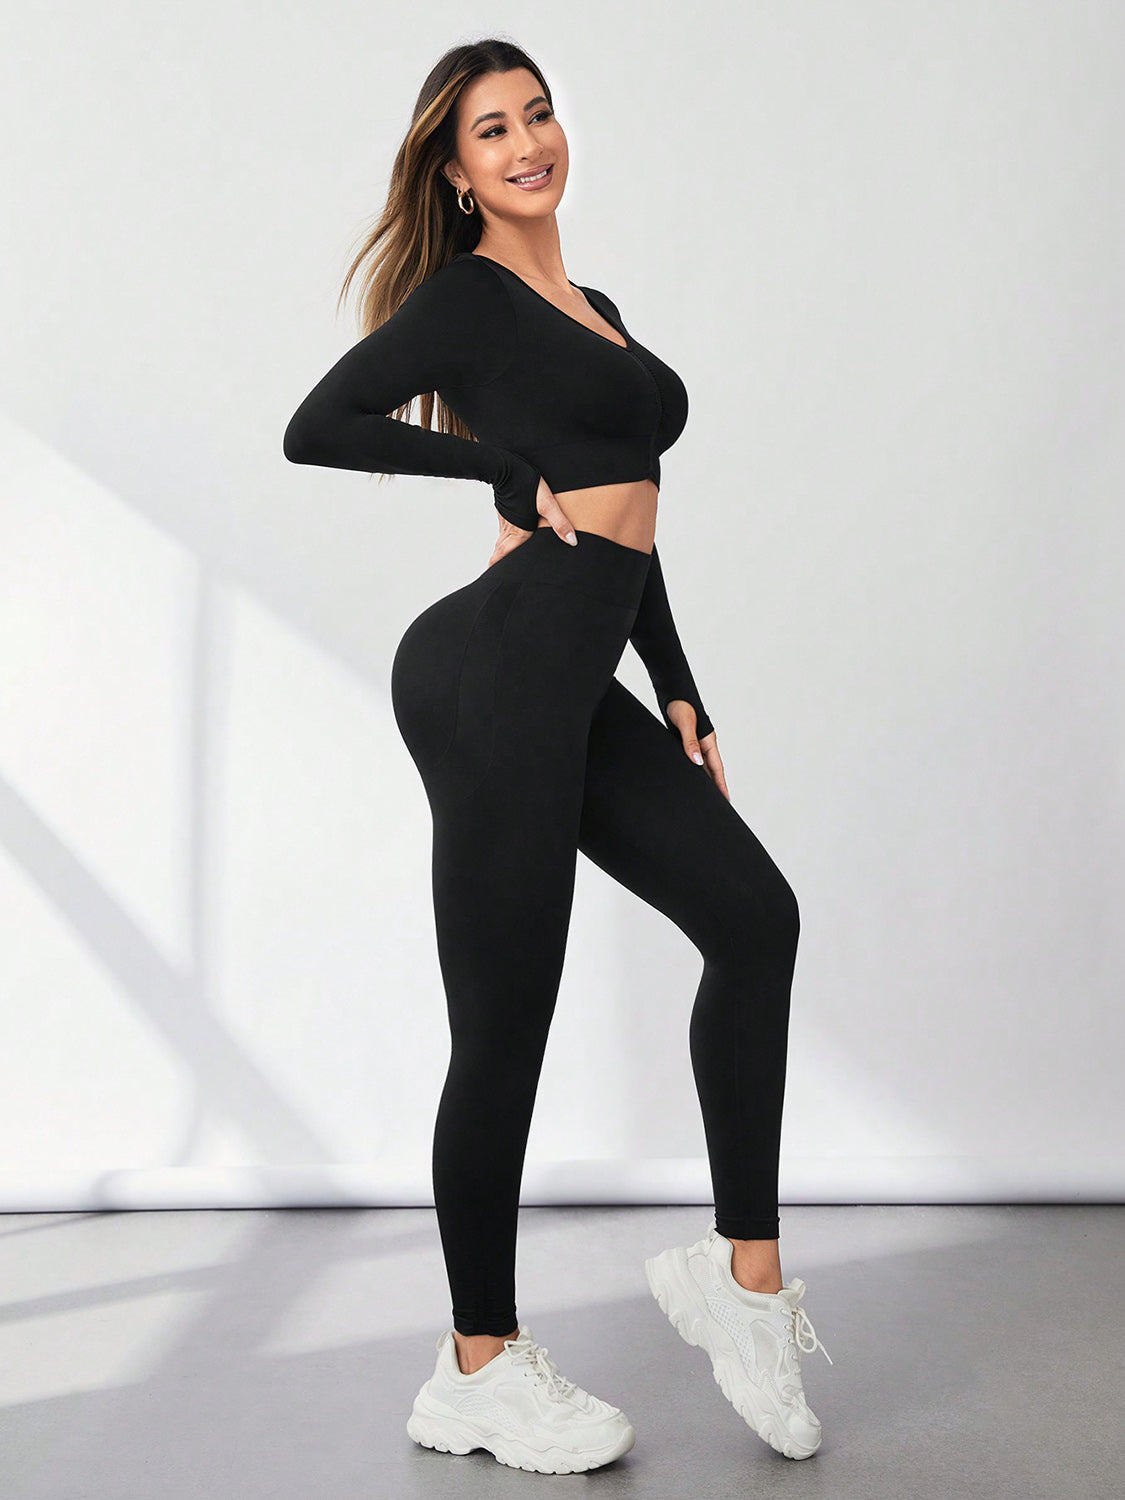 Activewear Two Piece Outfit Set Women's Sports Fashion V-Neck Long Sleeve Top Thumb Hole  and Leggings Active Set